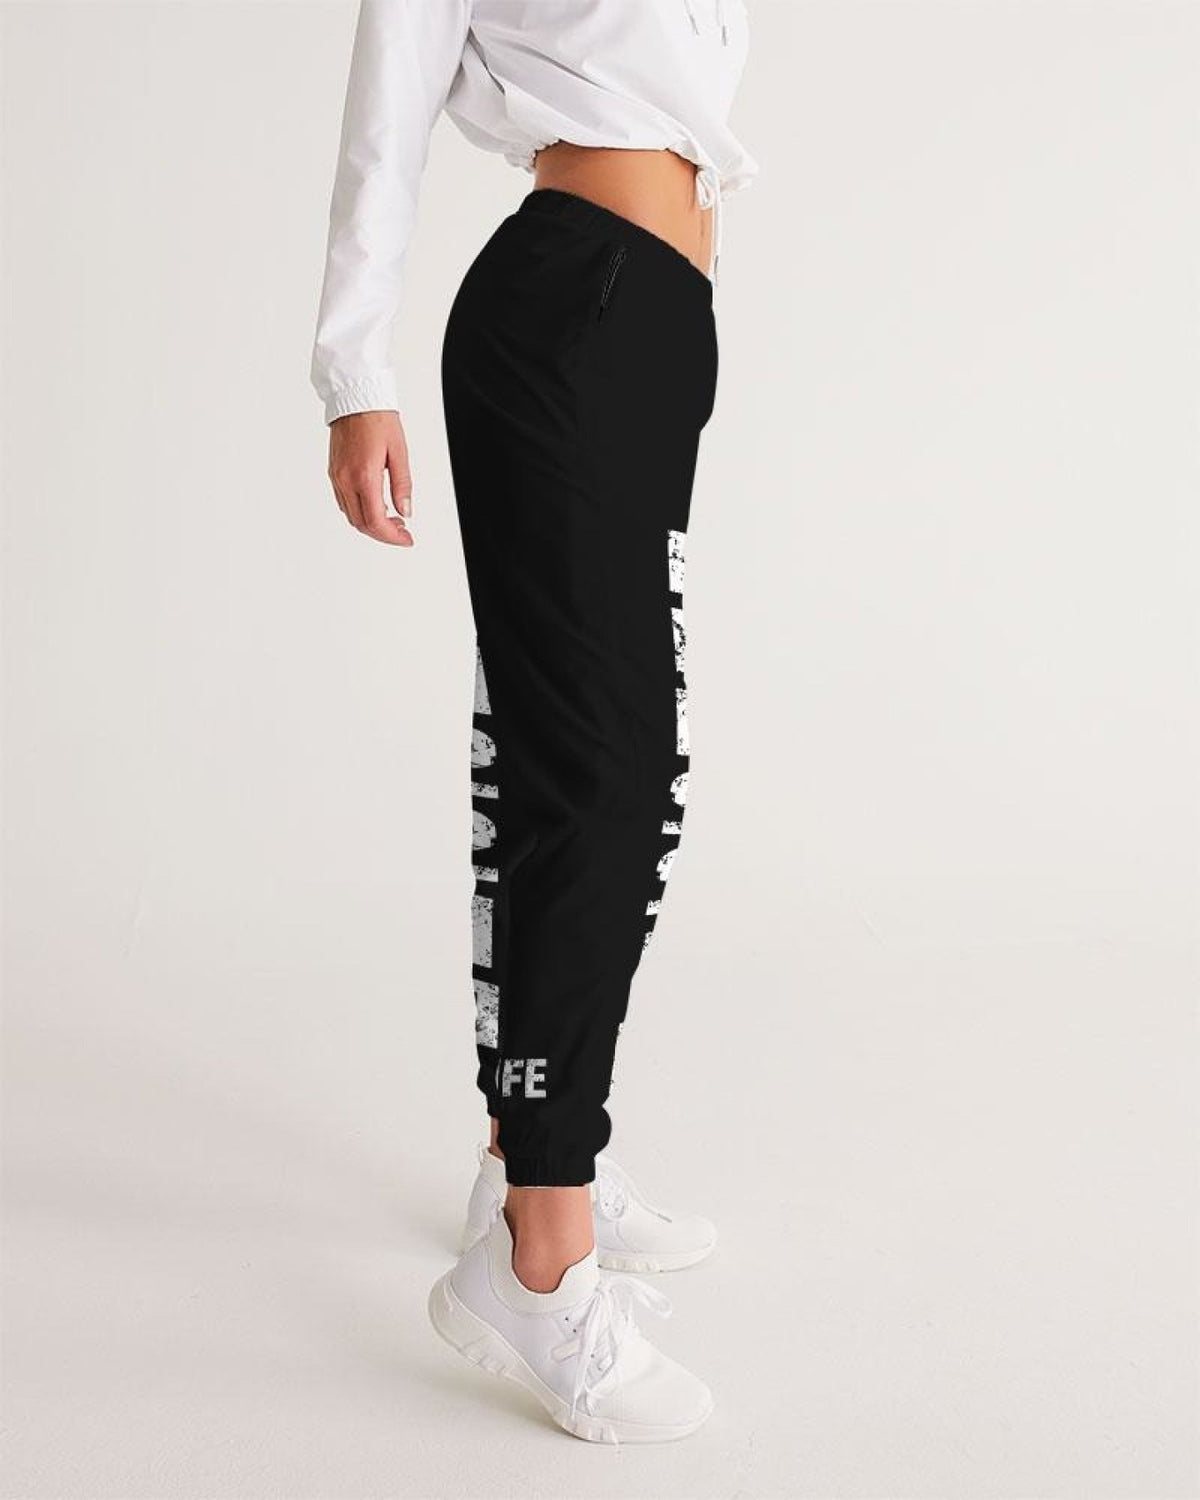 Womens Track Pants - Black & White Blessed Graphic Sports Pants Angelwarriorfitness.com